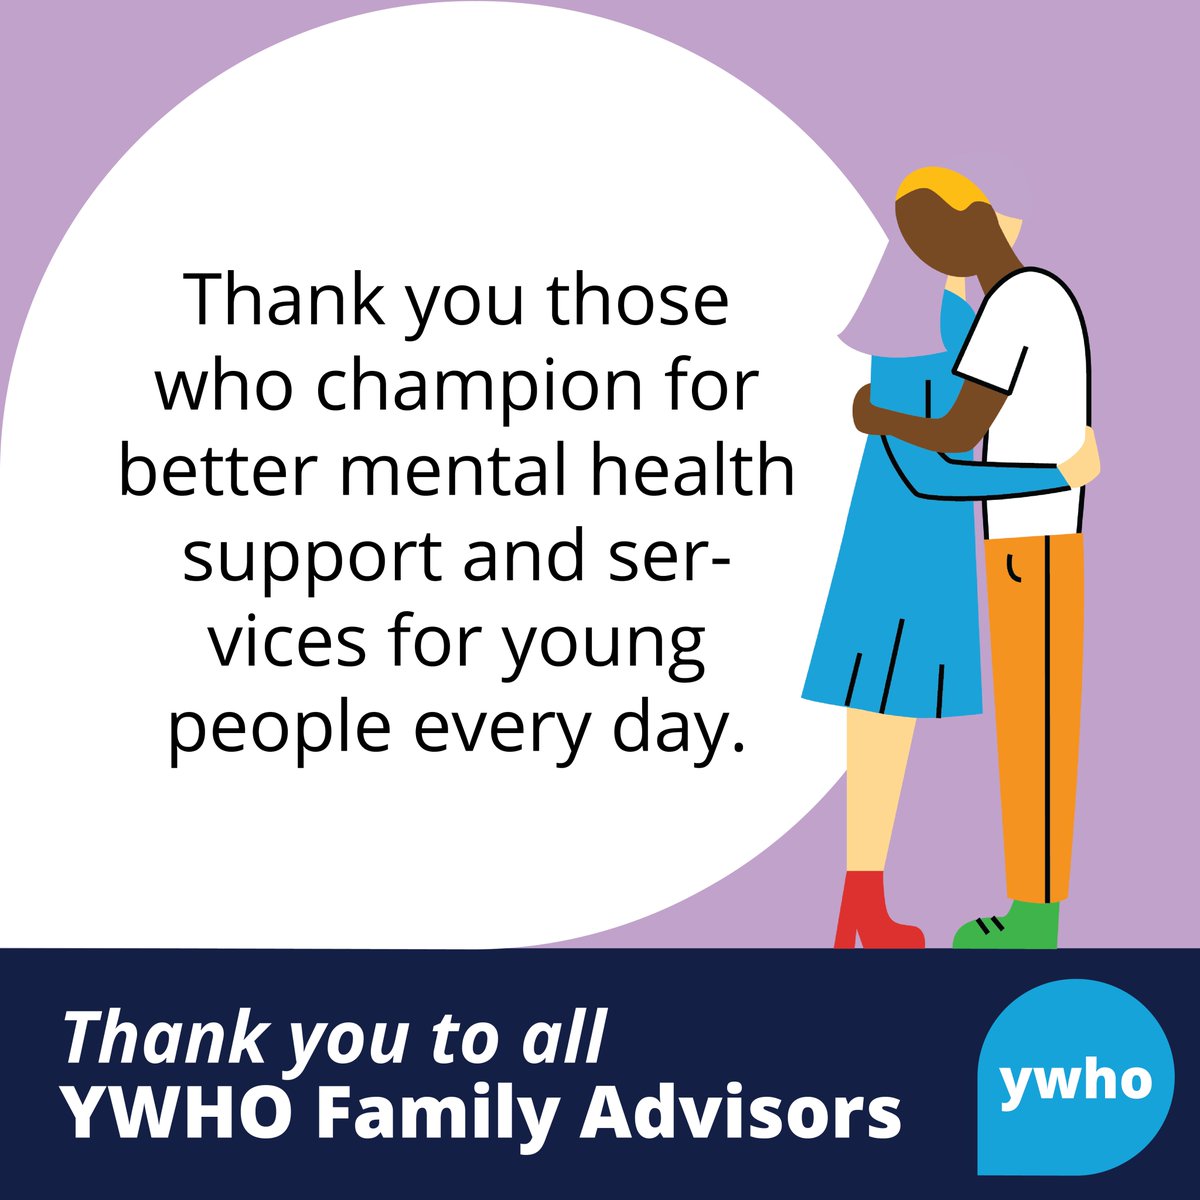 DYK: June 1st was #GlobalDayOfParents. We recognize the importance of families and support individuals in the success of youth's individual journeys with mental health and other challenges. YWHO also relies on input from families and caregivers to better meet youth needs. (1/2)